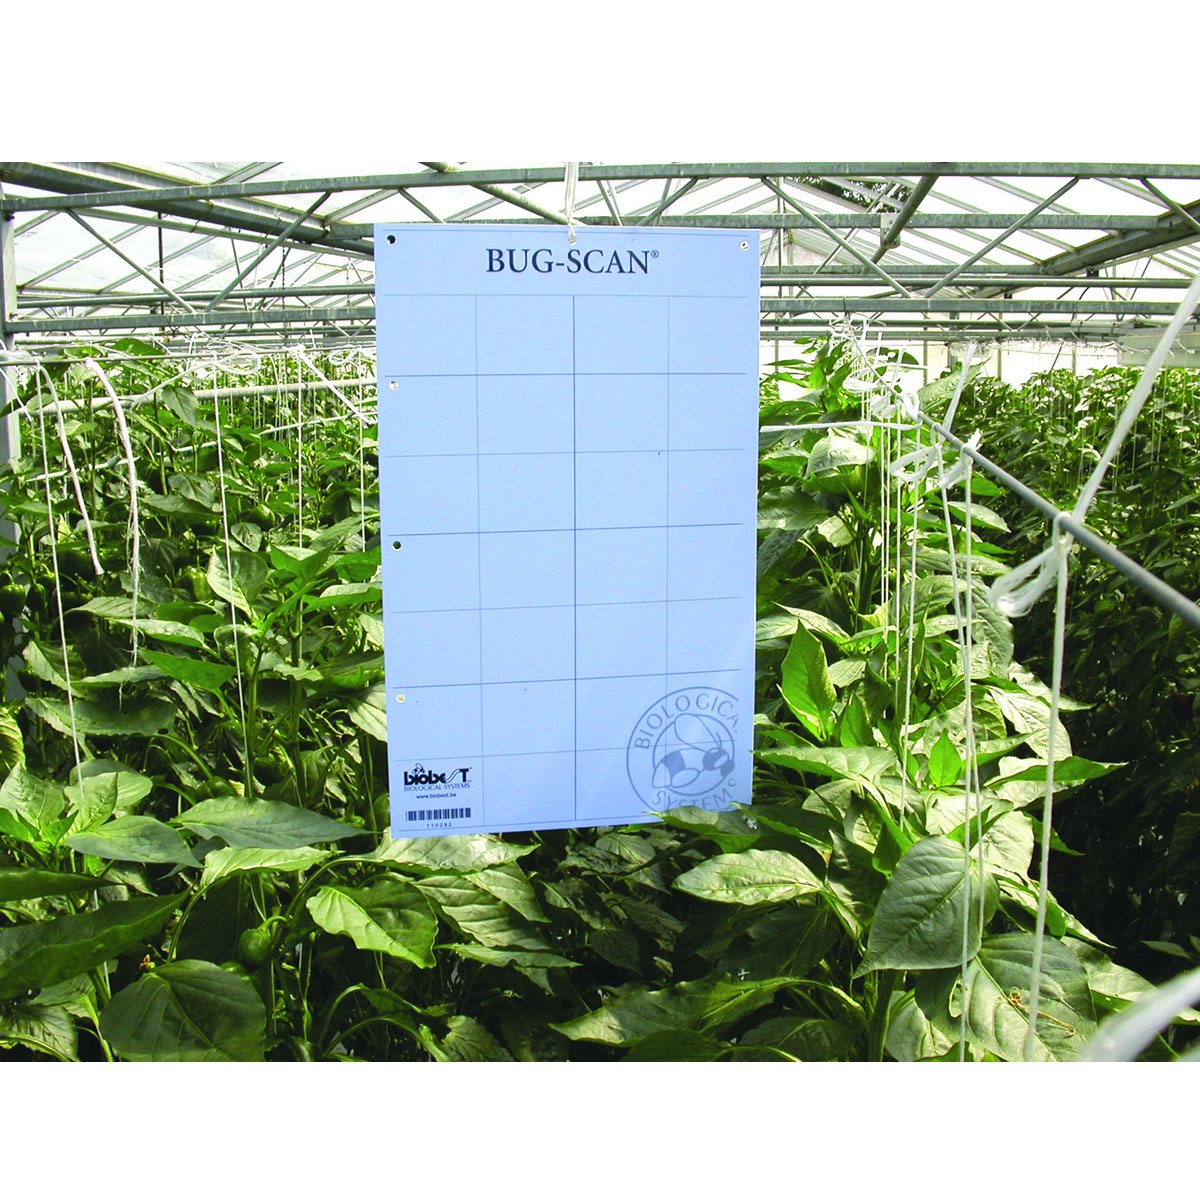 Product Secondary Image:Piège autocollant Bug-Scan bleu pour thrips / mineuses (10 / paquet)